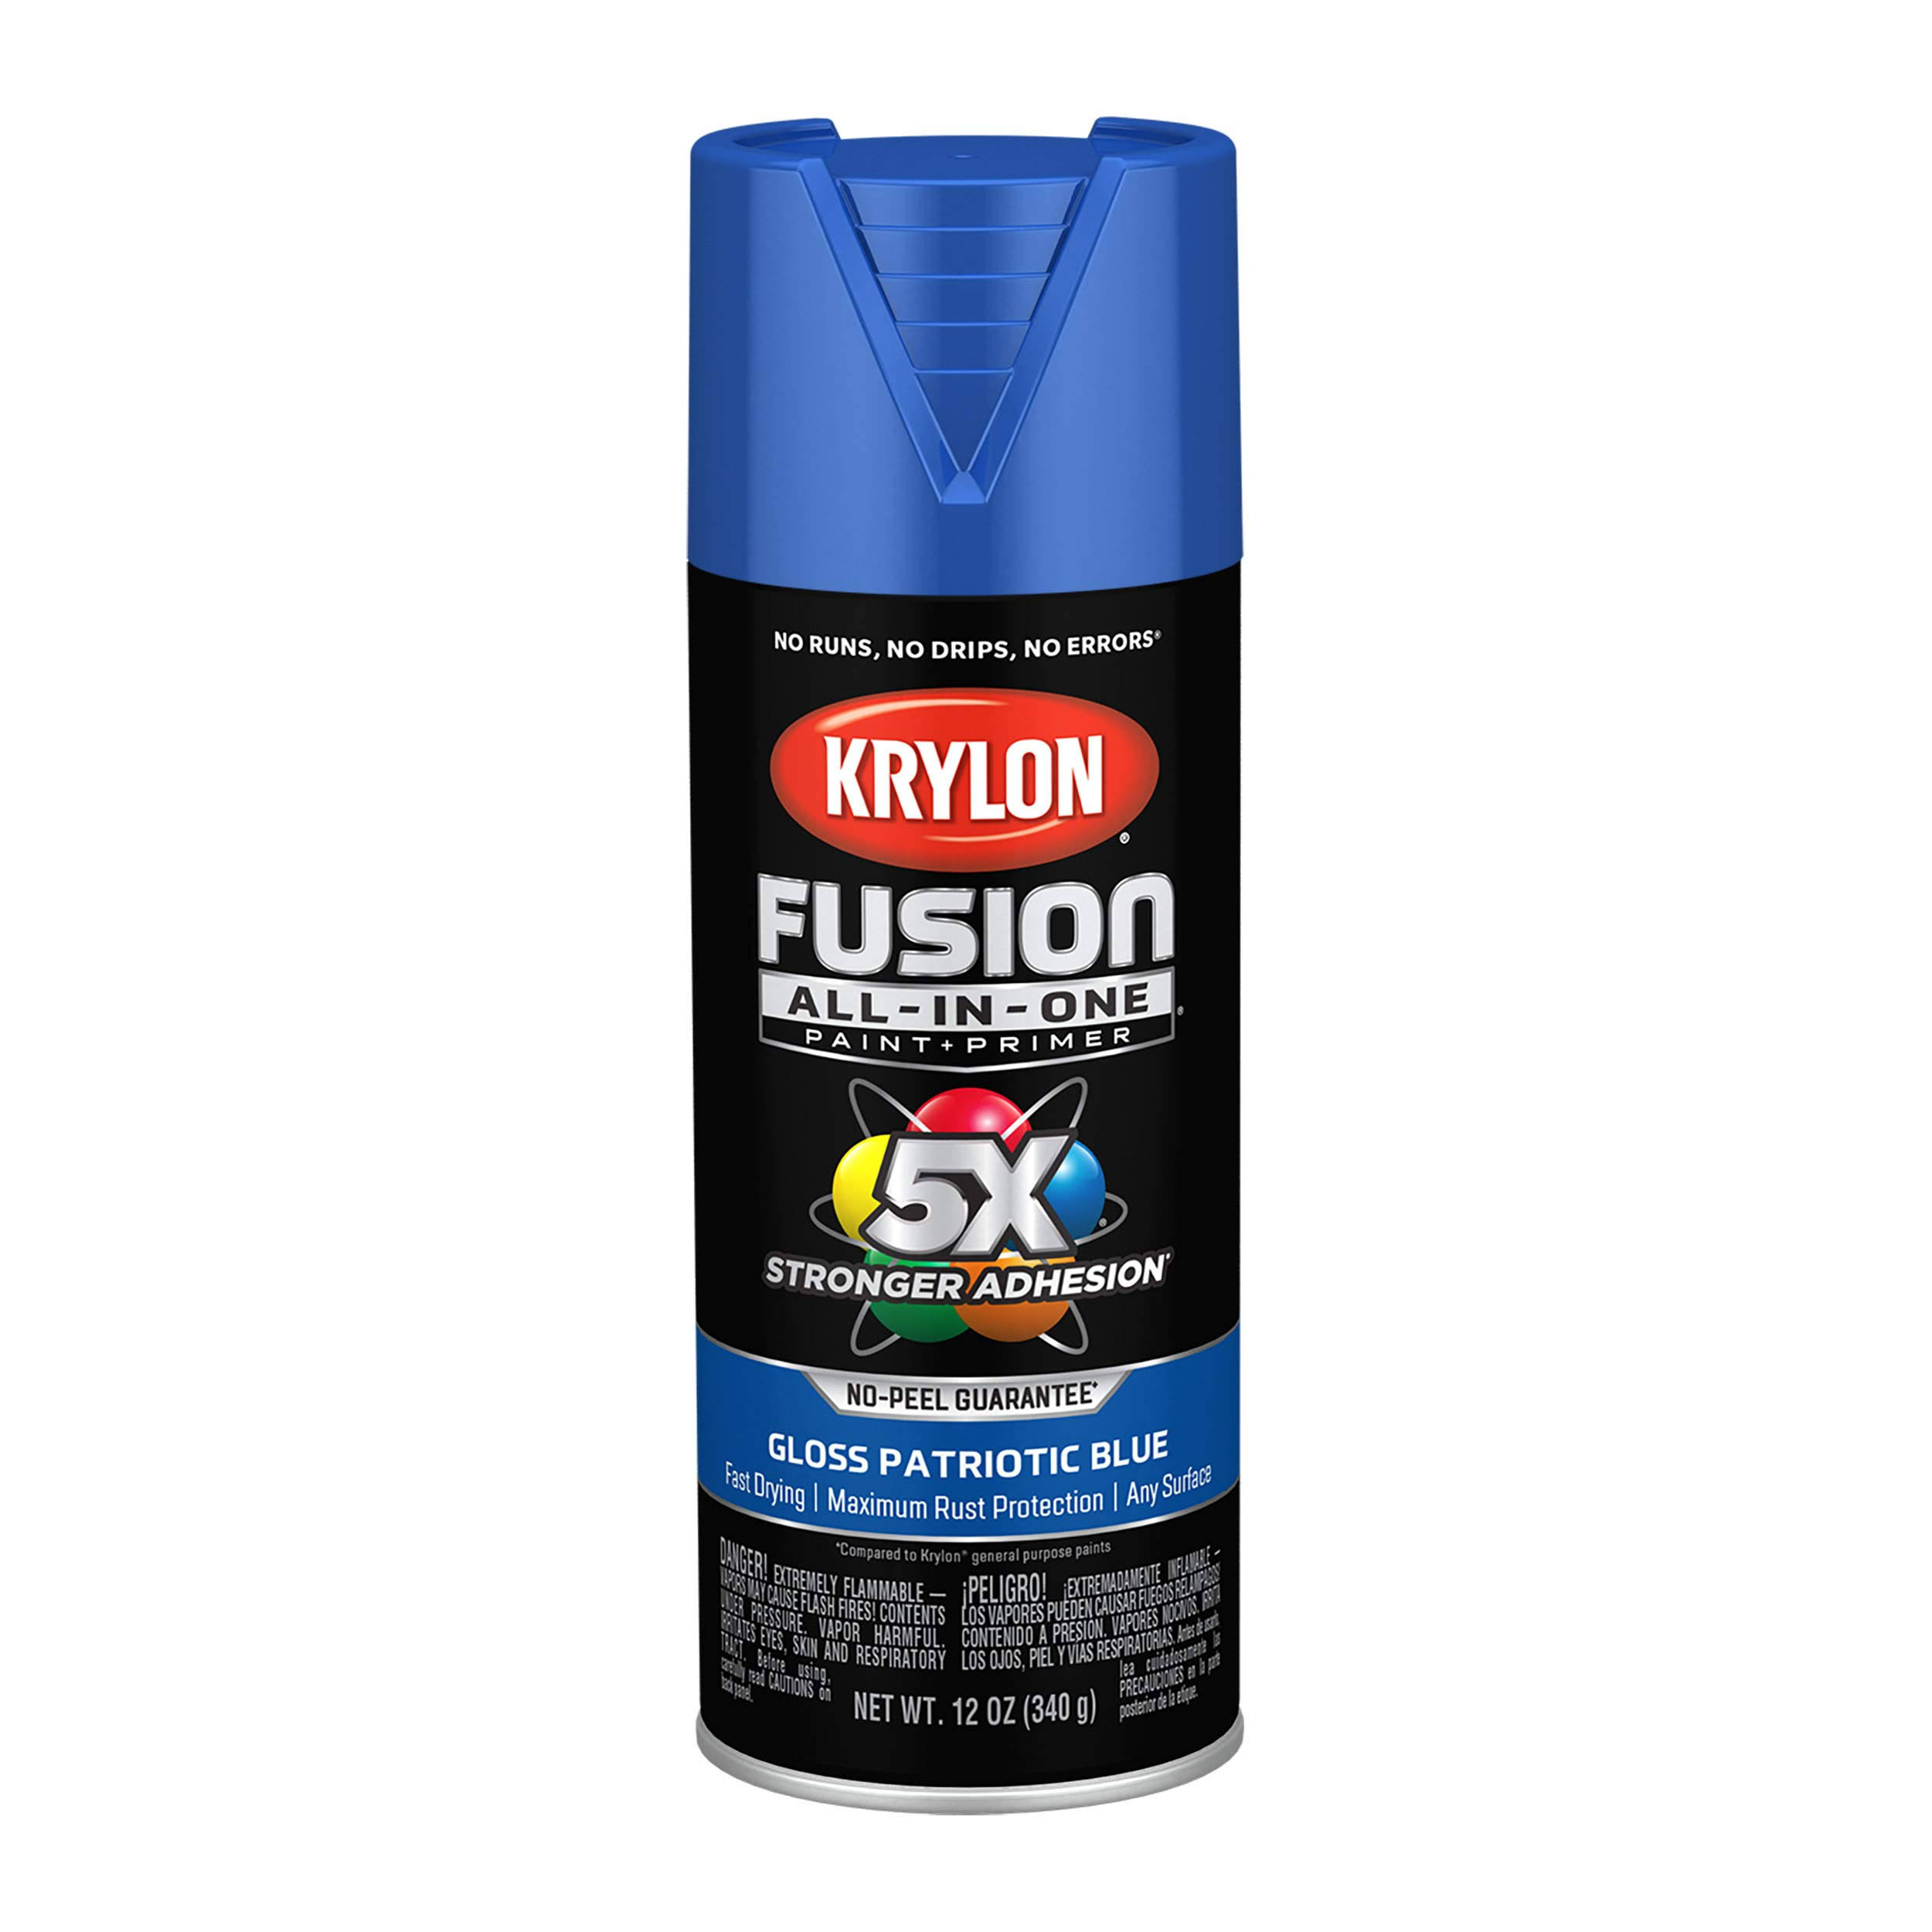 Krylon K02716007 Fusion All-In-One Spray Paint for Indoor/Outdoor Use, Gloss Patriotic Blue